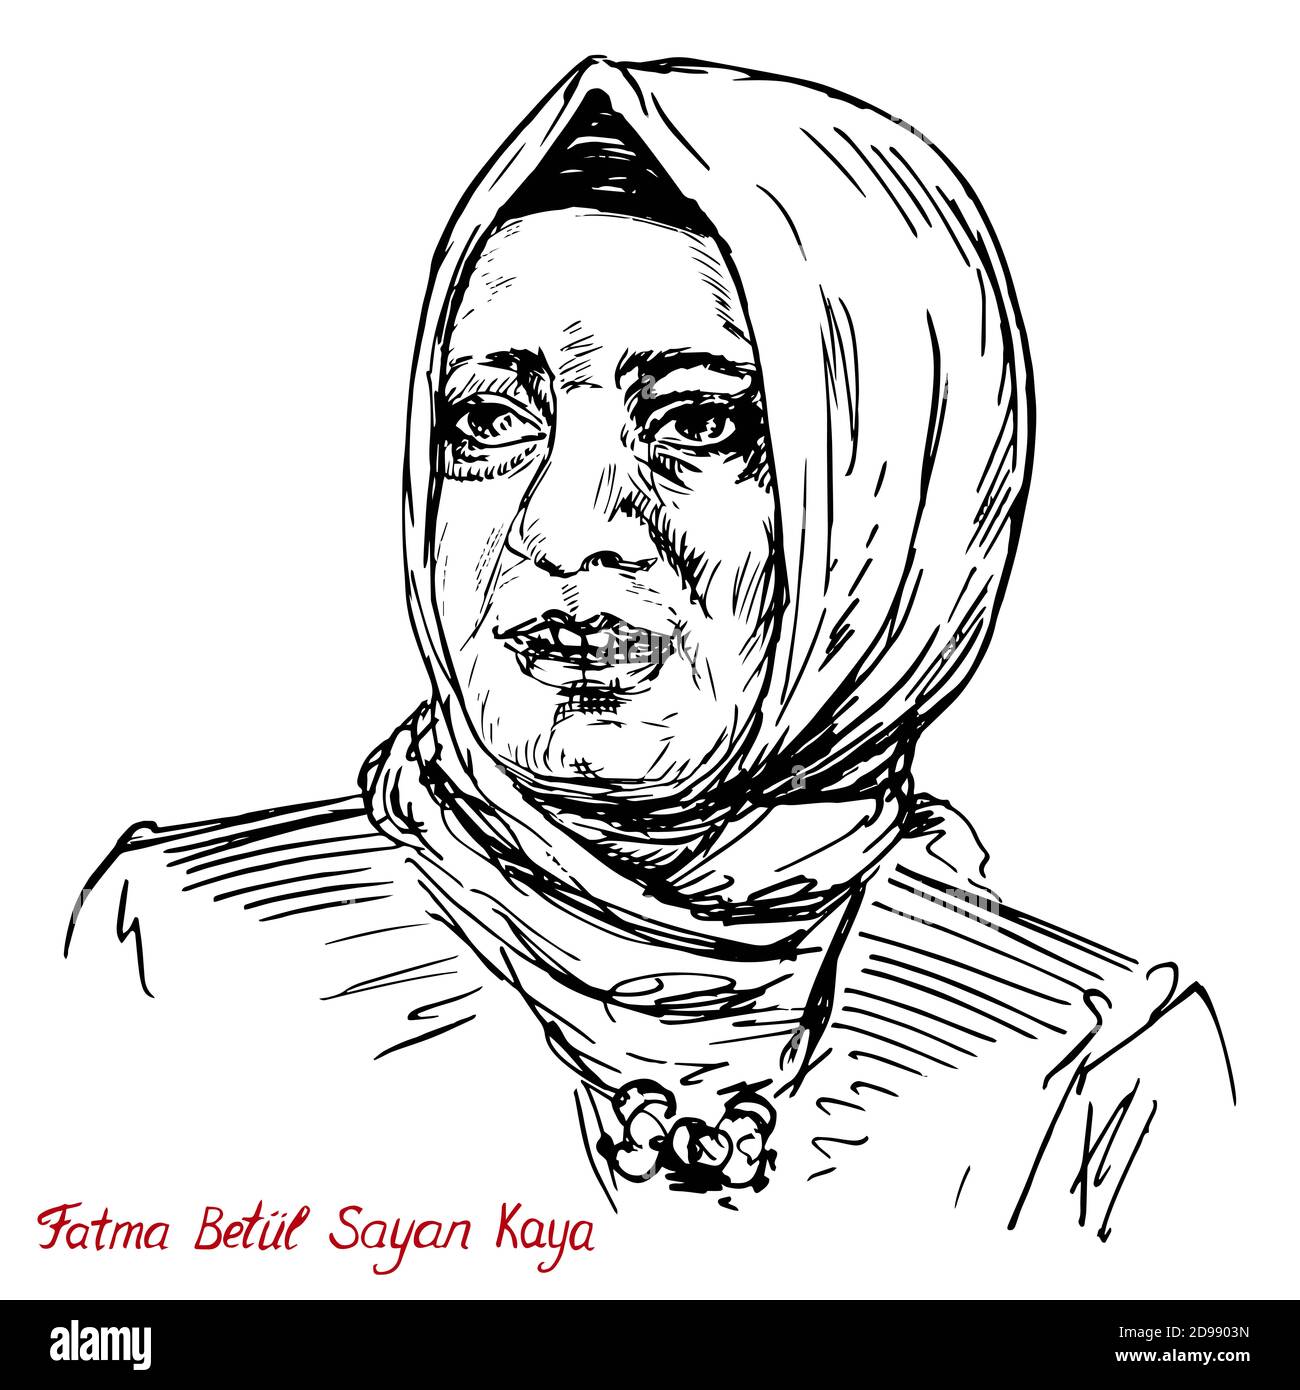 Fatma Betul Sayan Kaya, Turkish politician, Minister of Family and Social Policies, vice-chair of Justice and Development Party (AKP), hand drawn Stock Photo